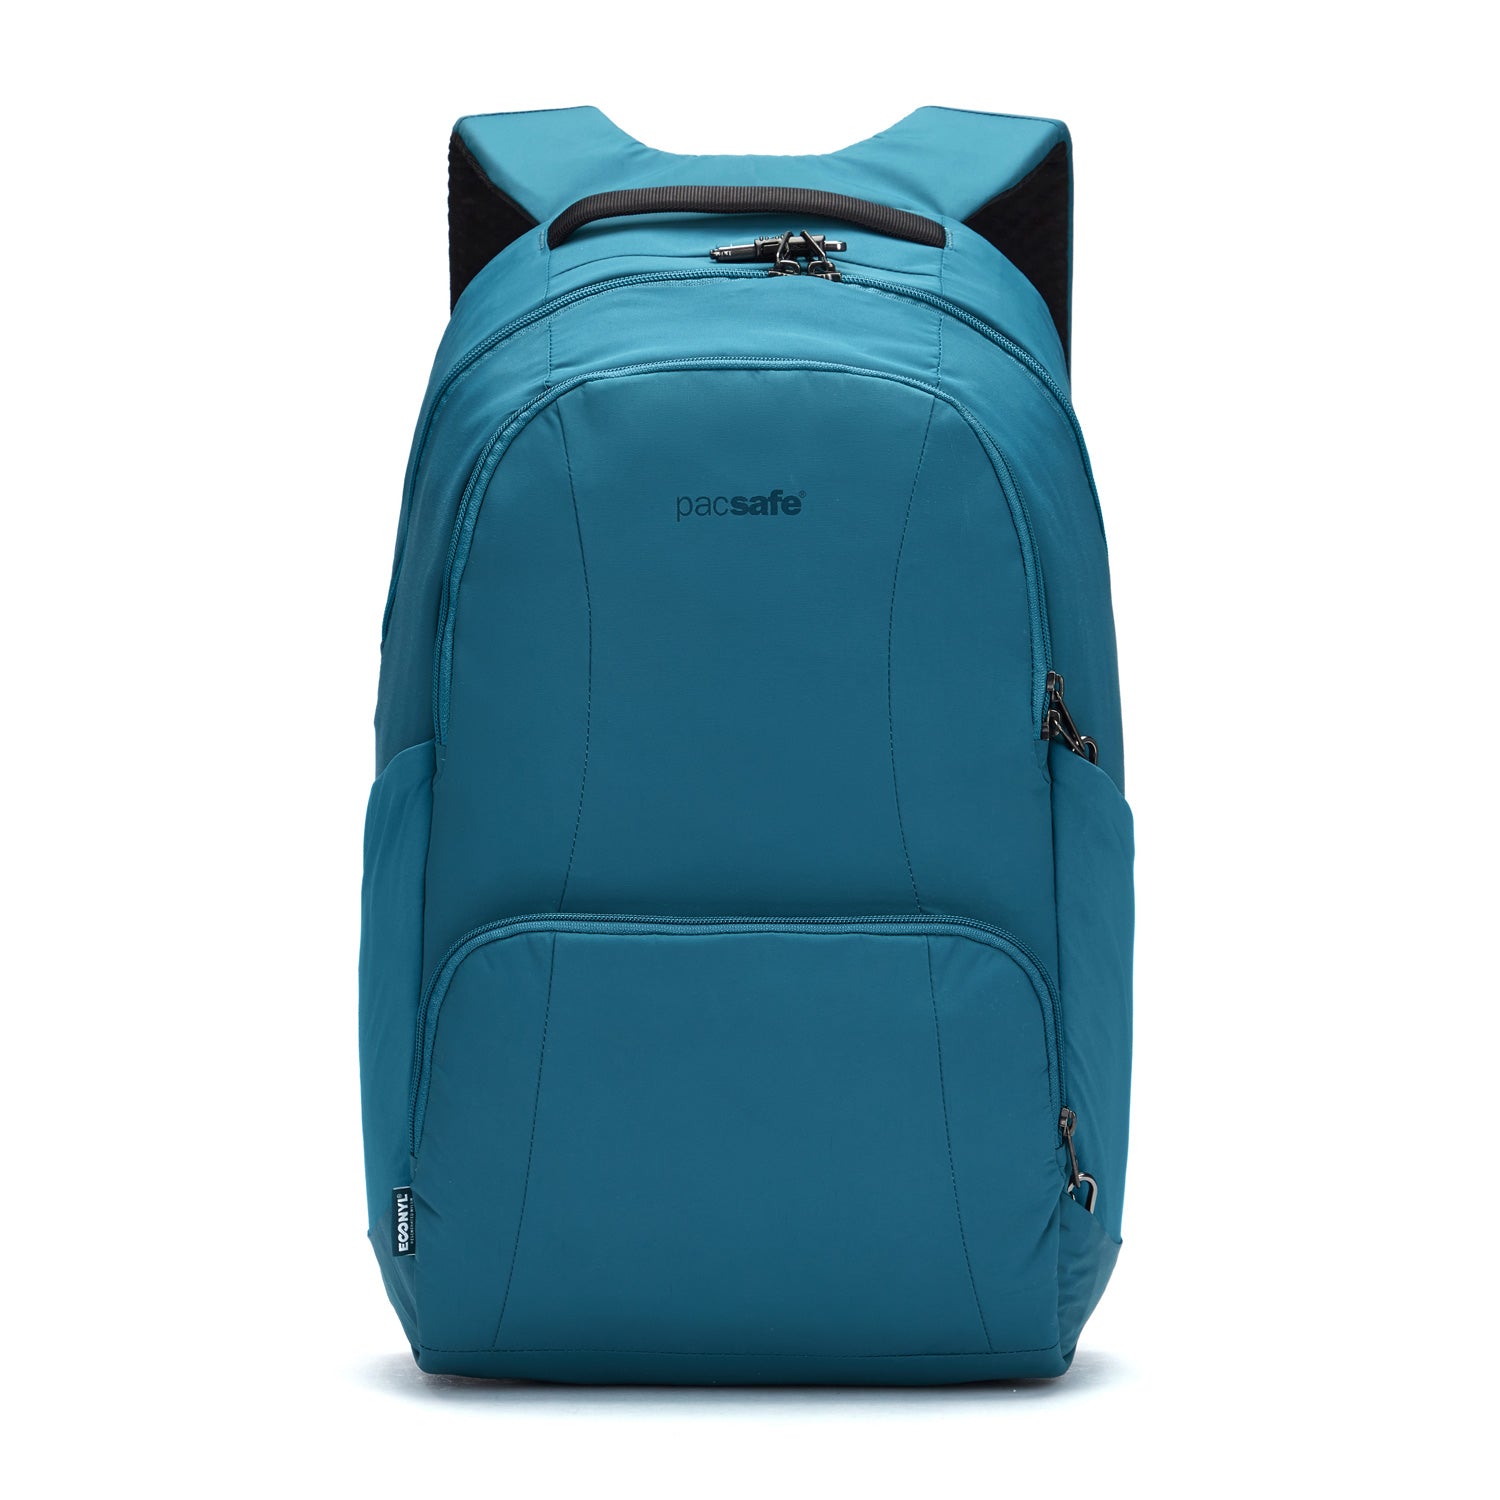 Buy Travel Backpacks Online, With Anti-Theft Features